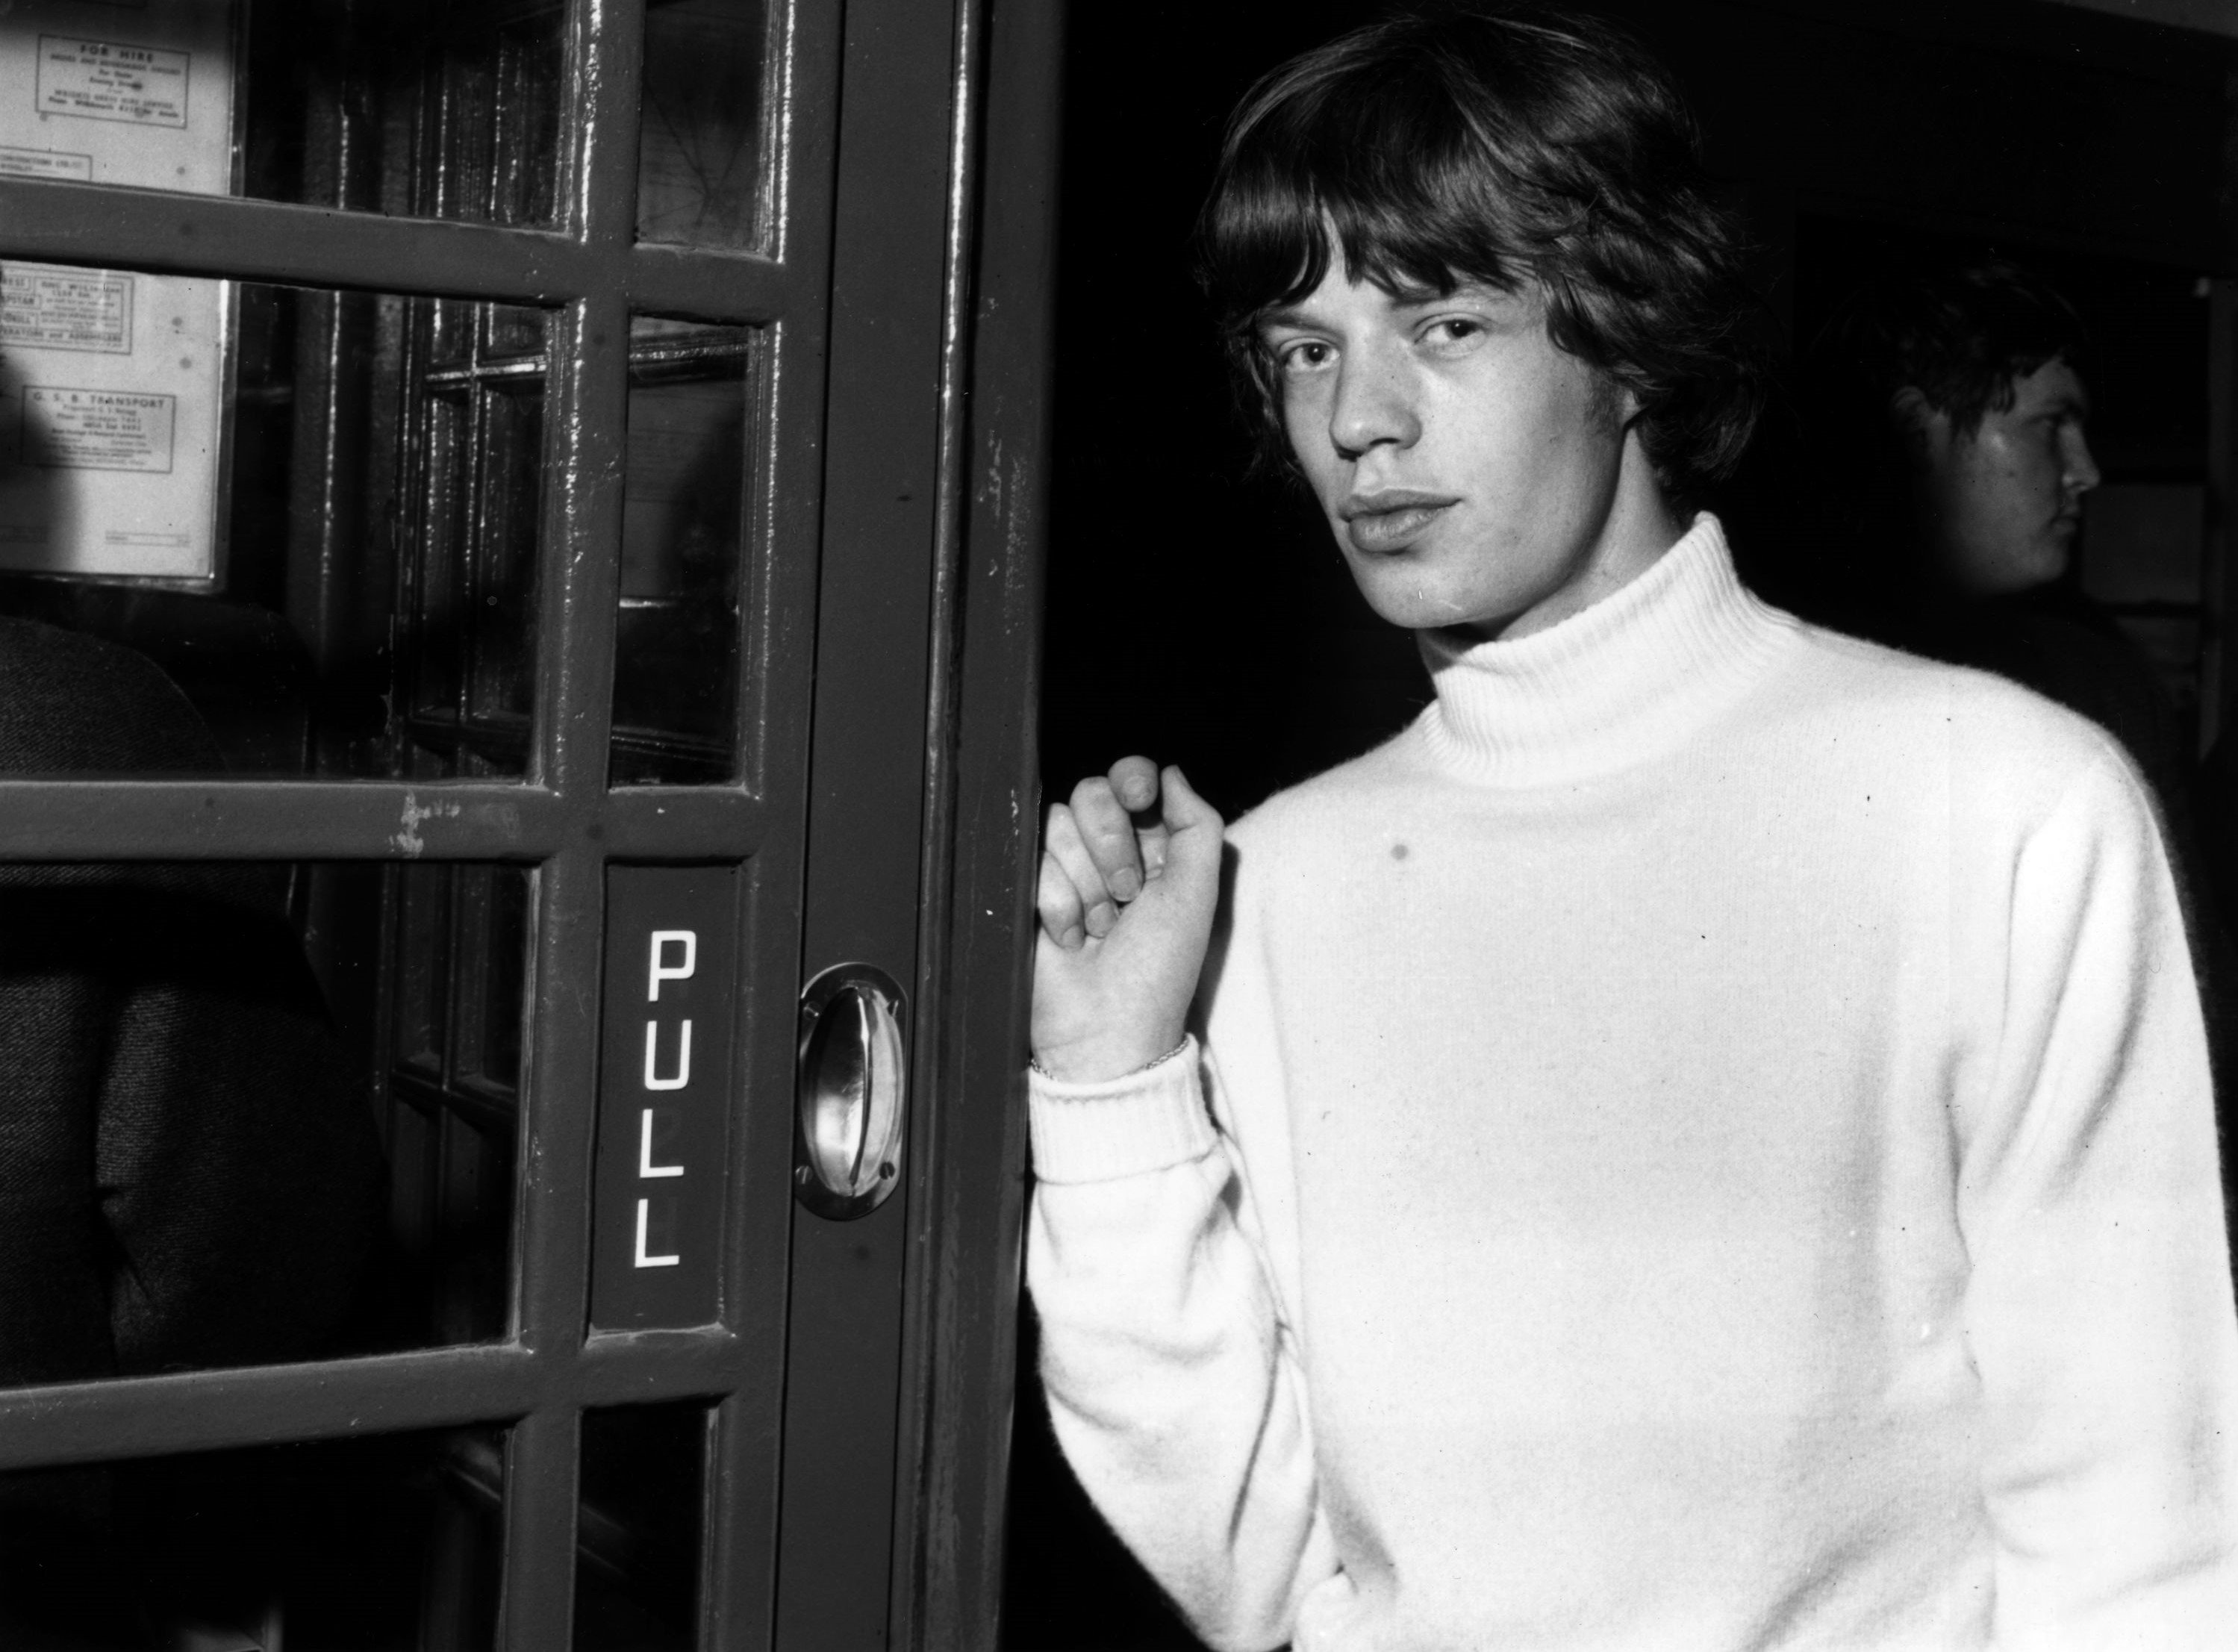 Muck Jagger in a sweater during The Rolling Stones' "Gimme Shelter" era